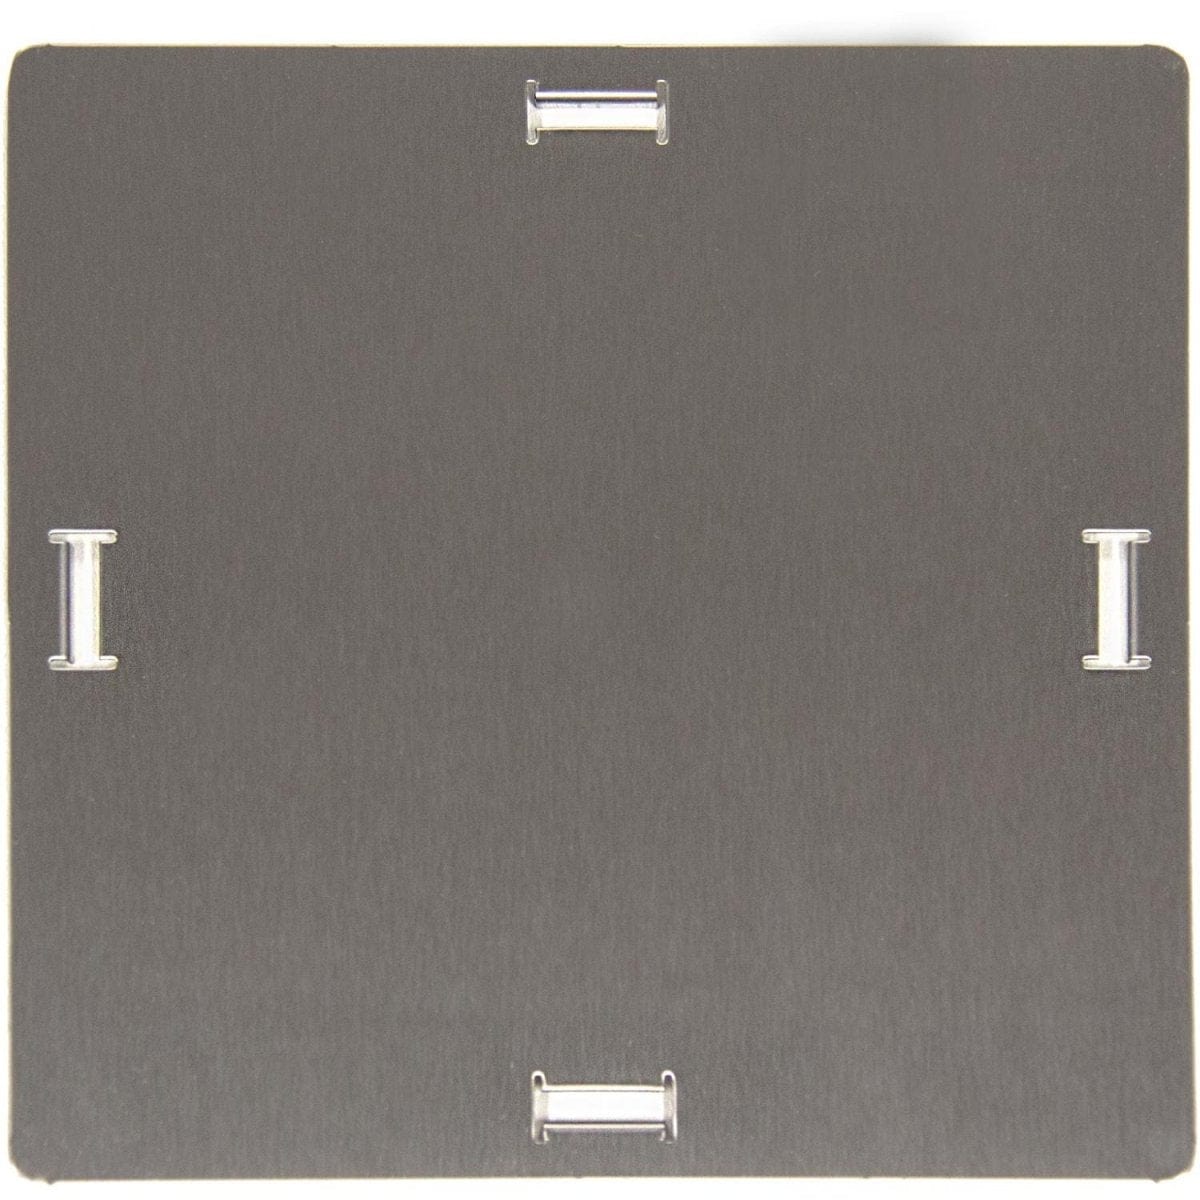 Blaze Blaze Stainless Steel Propane Tank Hole Cover For Grill Carts - BLZ-LPH-COVER Tank Hole Cover 134-BLZ-LPH-COVER